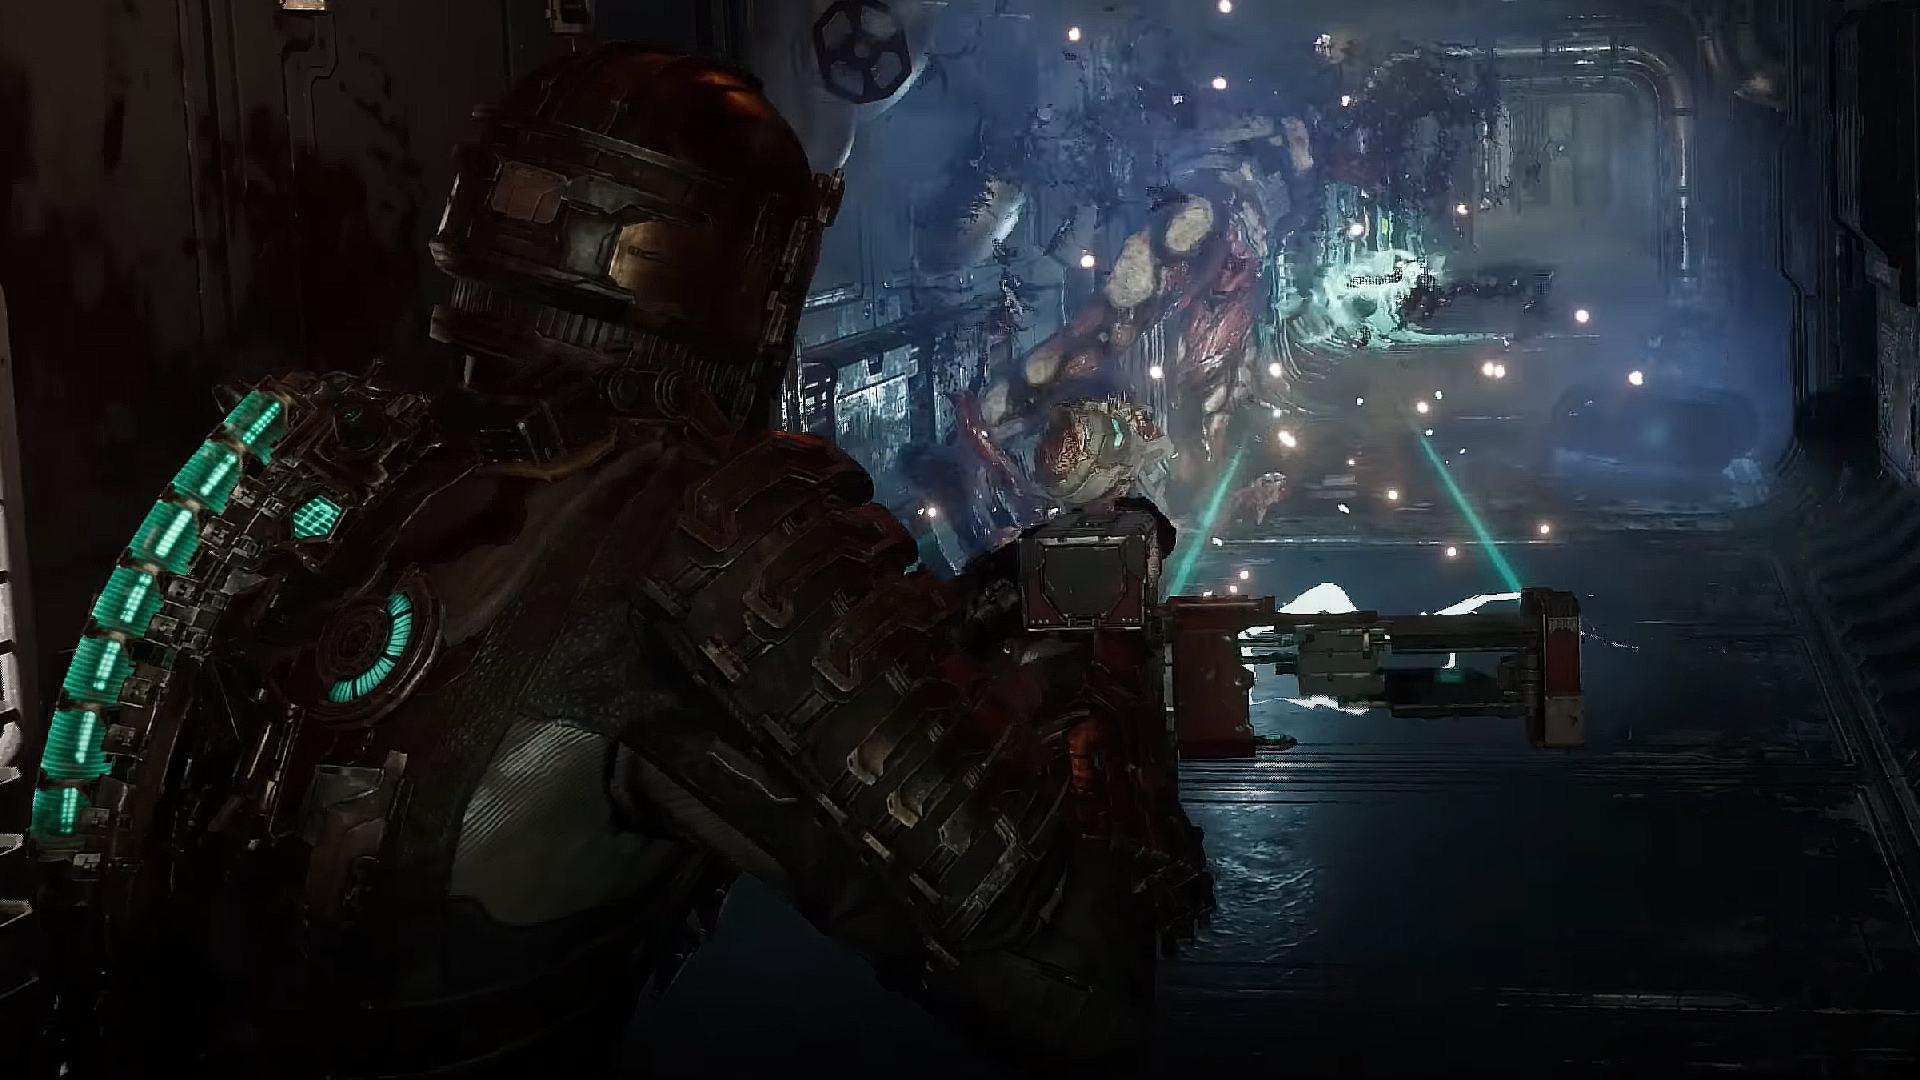 Dead Space upgrades guide: Weapons, locations and pricing